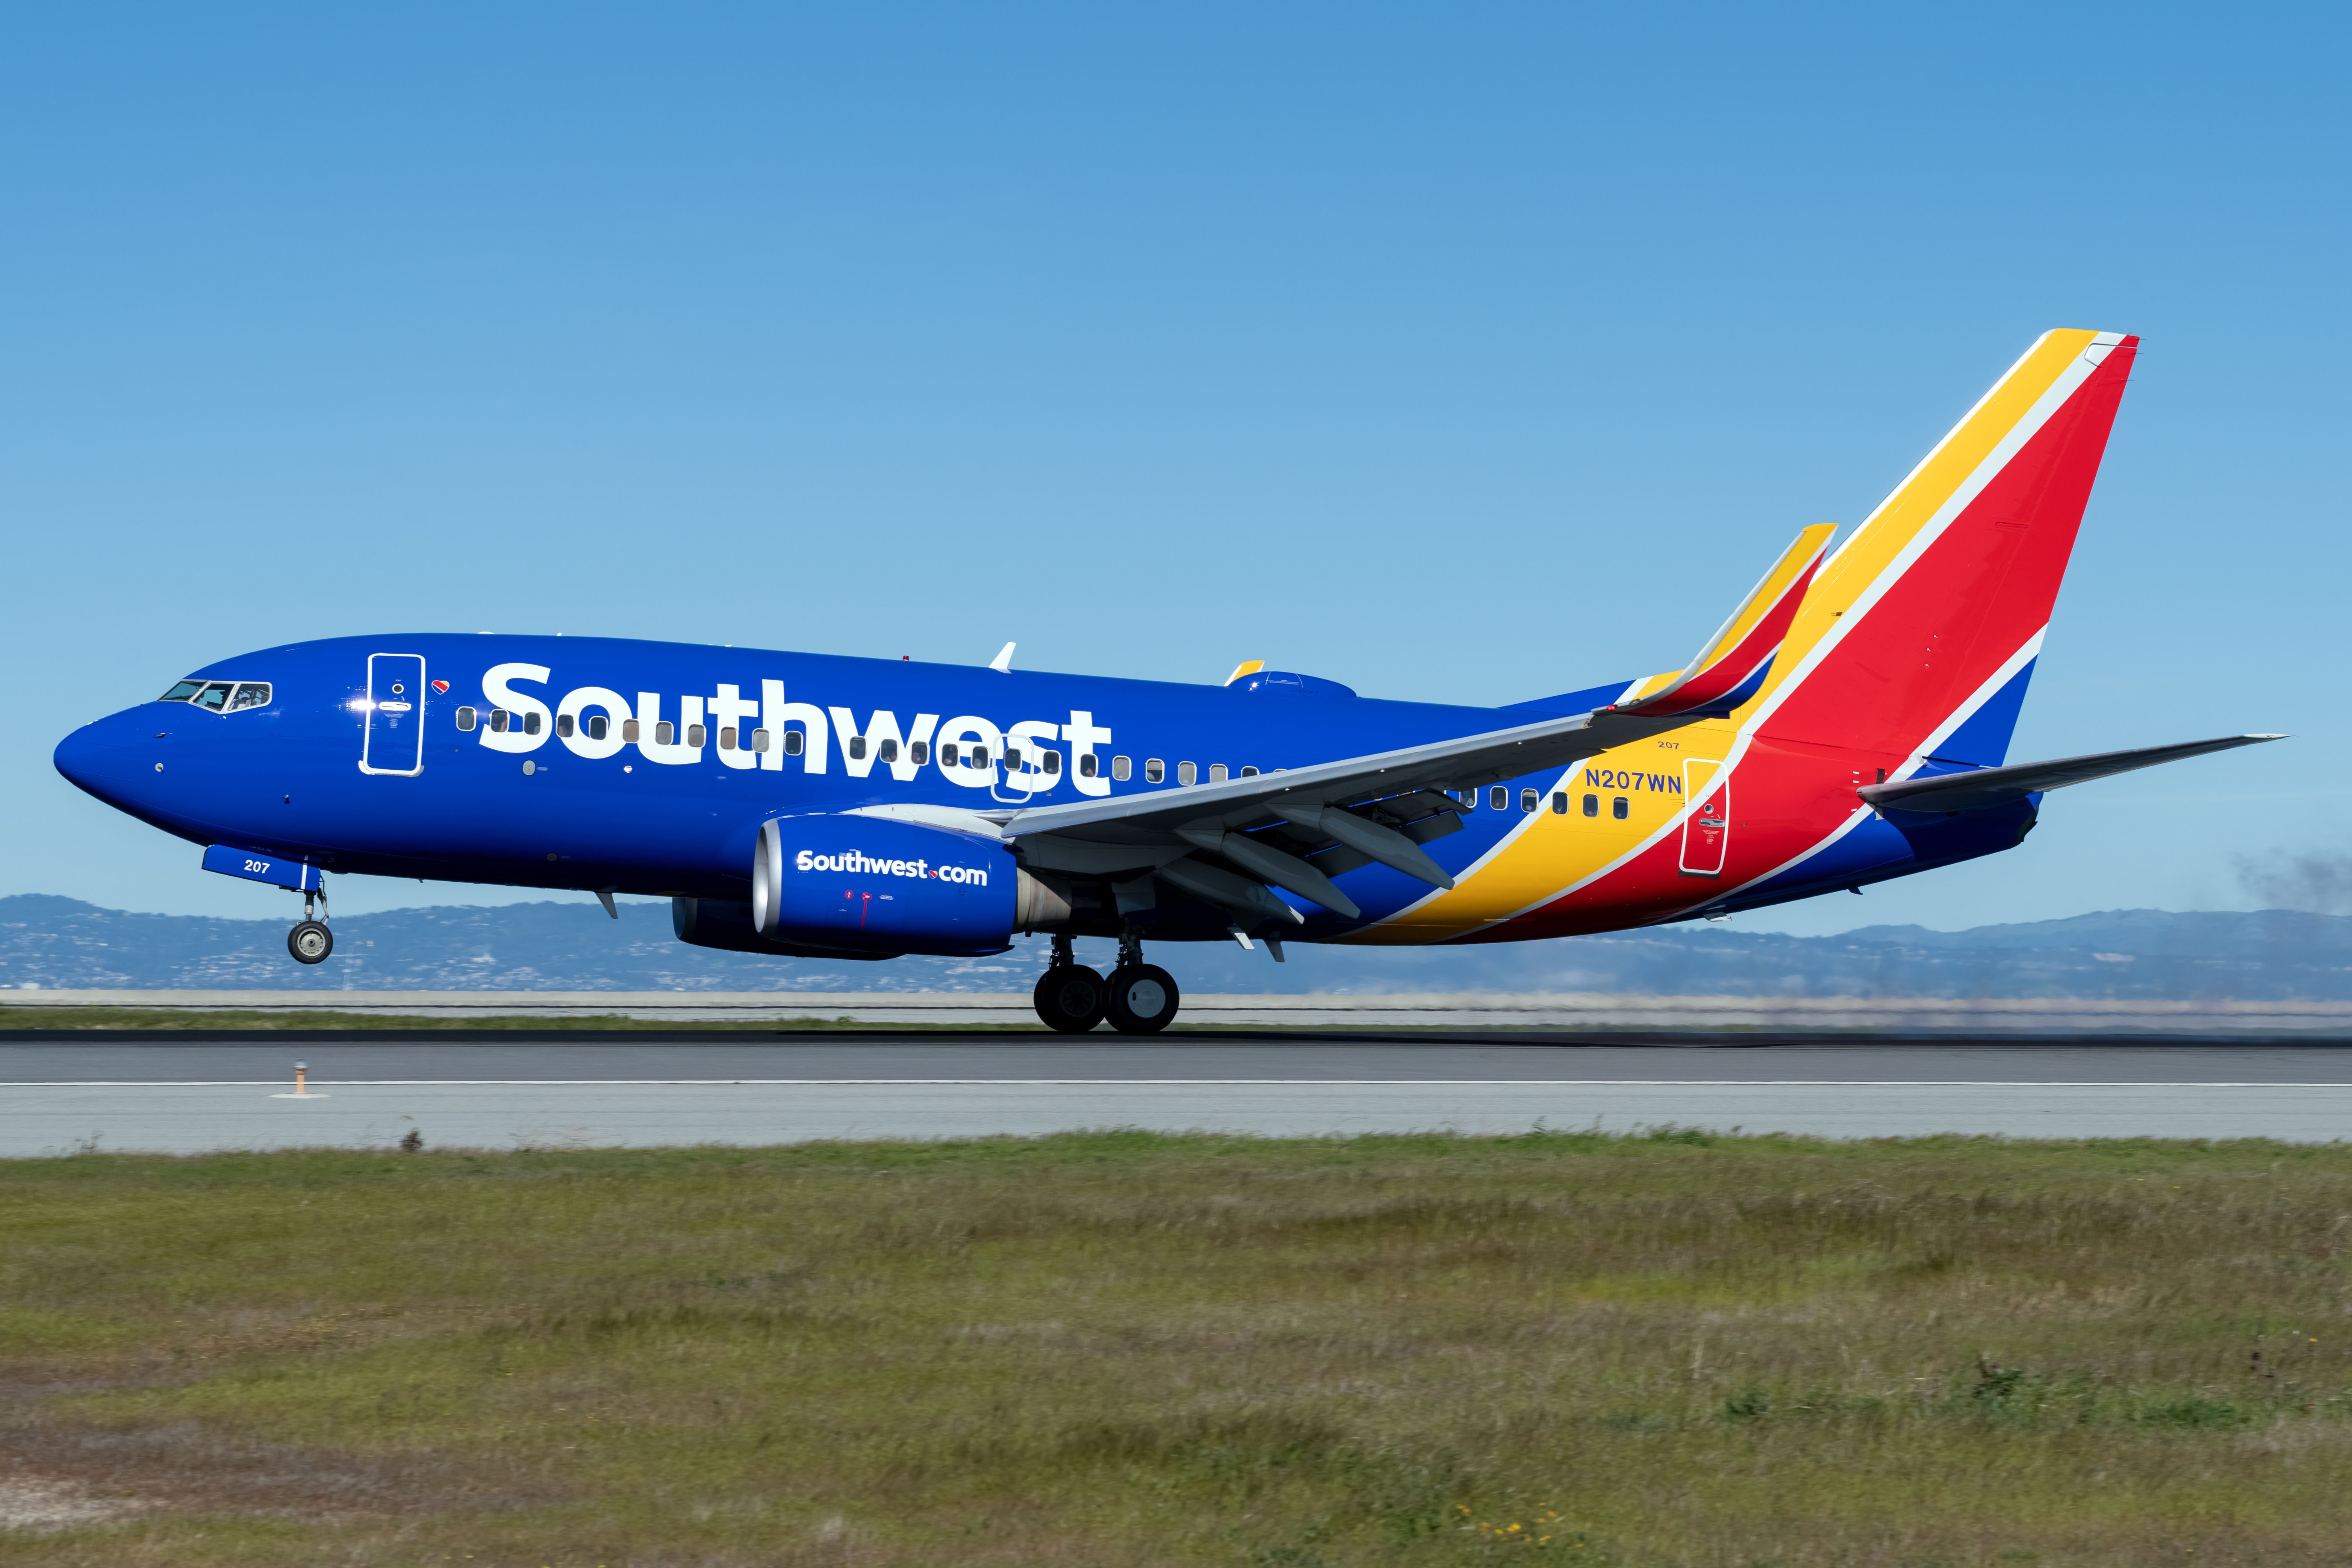 Southwest Airlines Boeing 737-700 landing